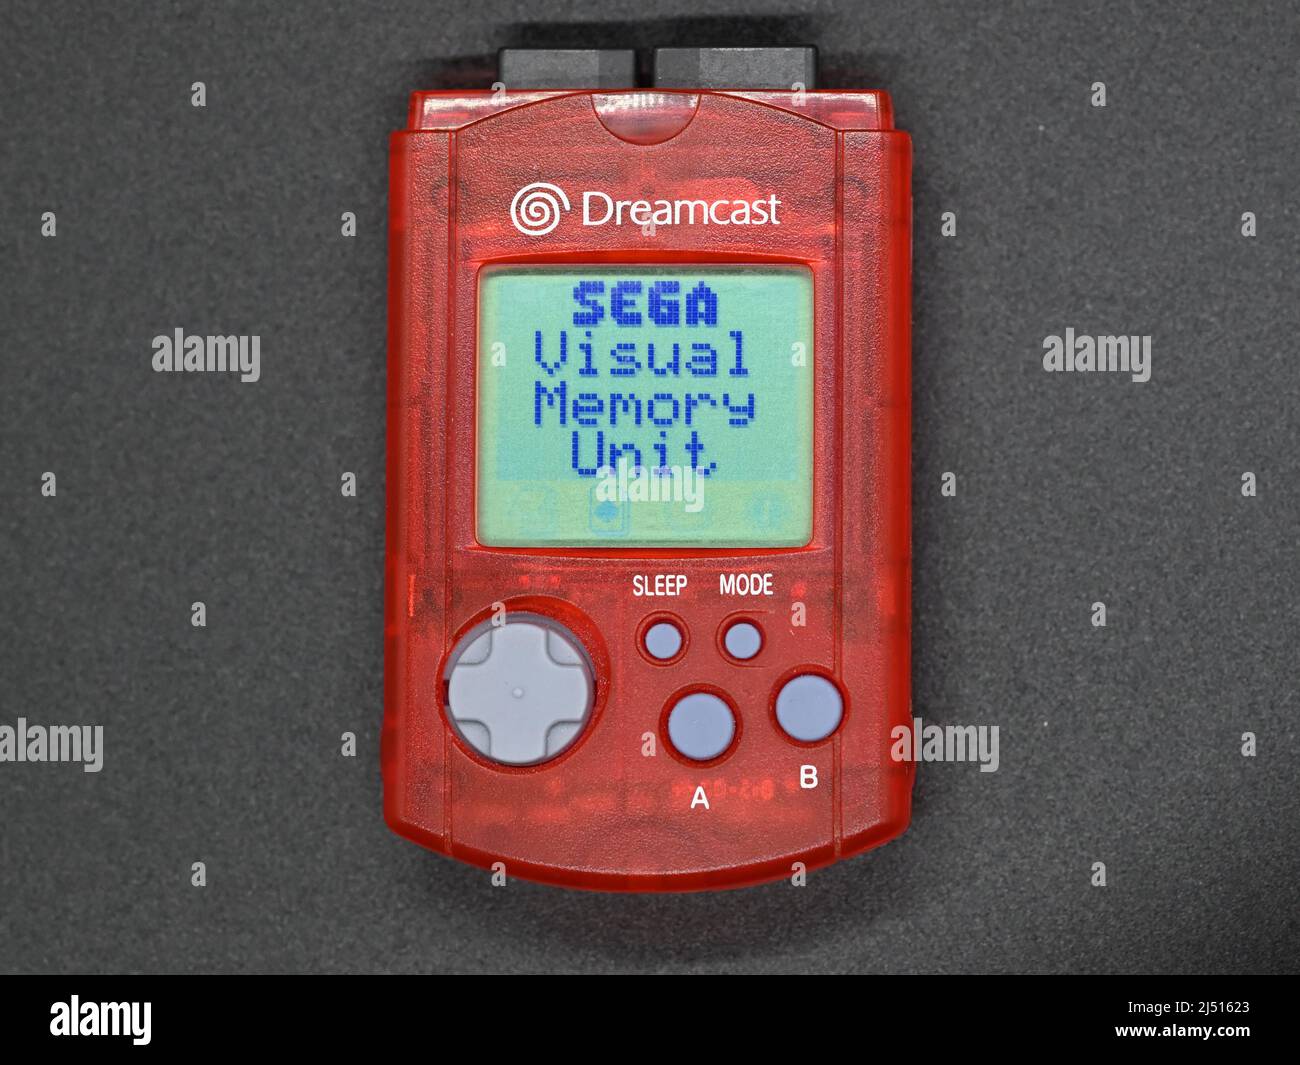 https://c8.alamy.com/comp/2J51623/red-sega-dreamcast-visual-memory-unit-or-vmu-with-power-on-and-lcd-display-viewable-on-a-dark-background-2J51623.jpg